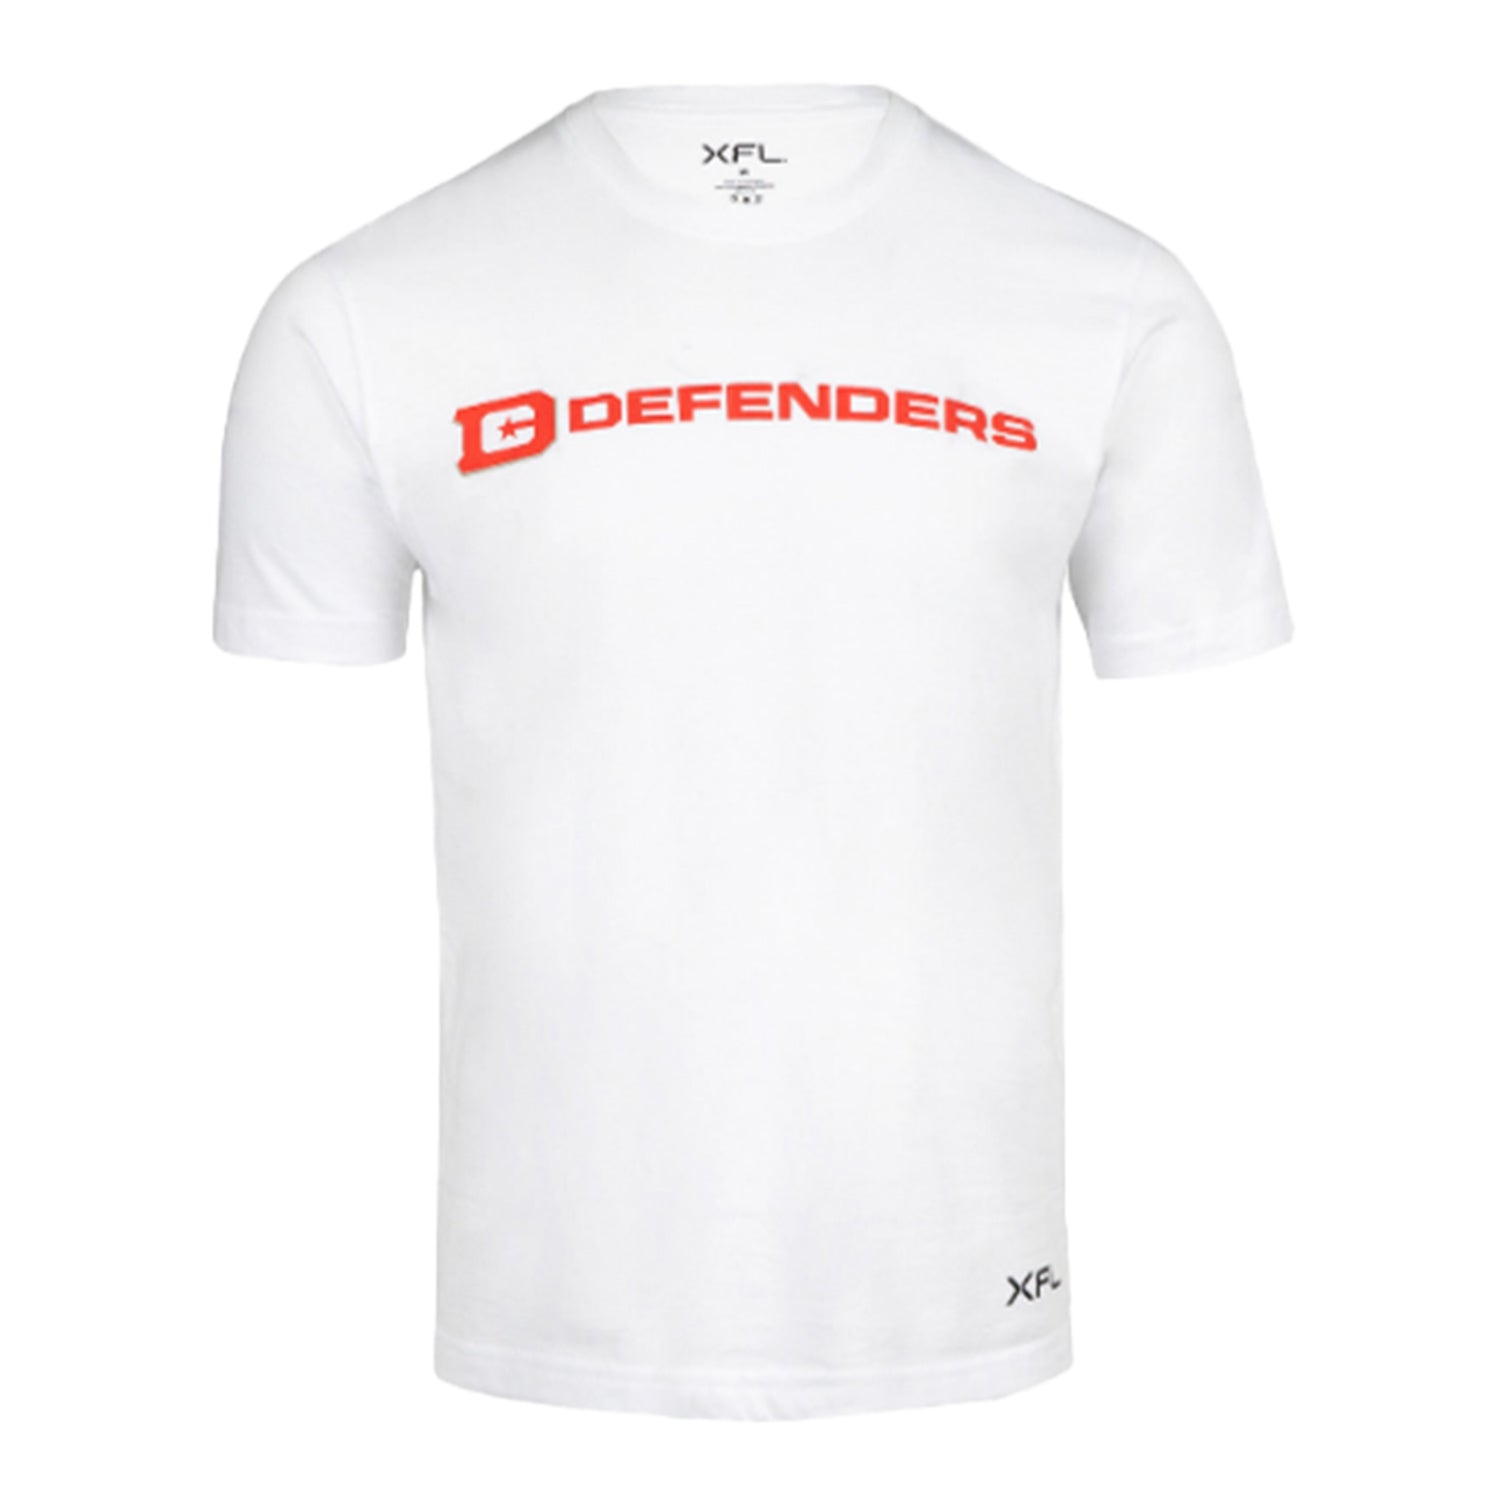 50/50 Defenders 1 Graphic Short Sleeve T-Shirt In White - Front View